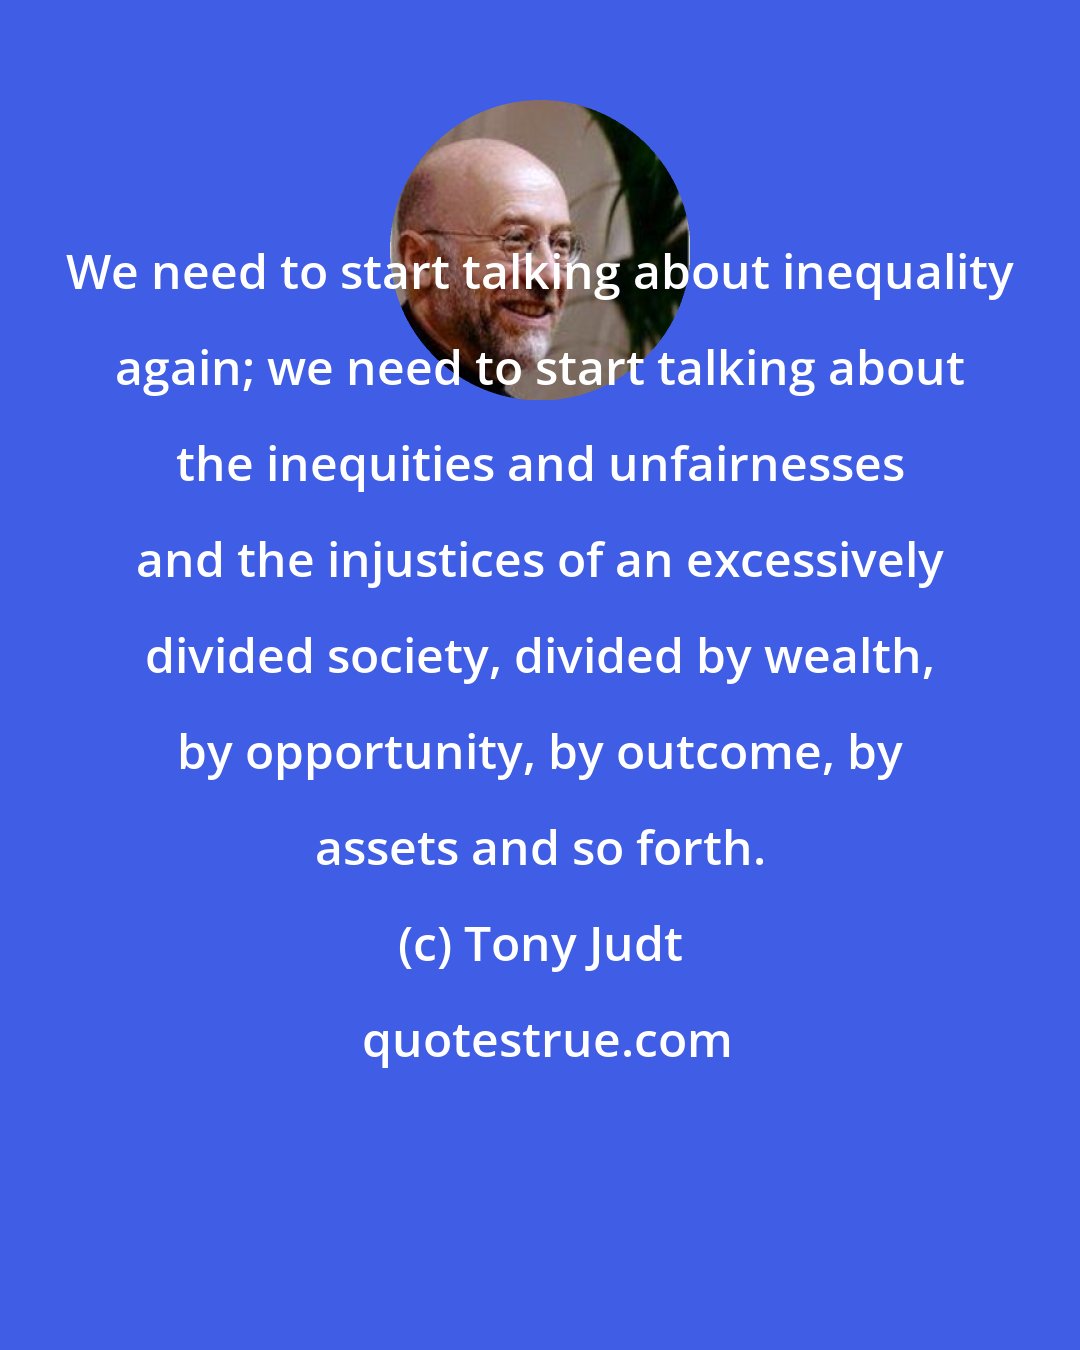 Tony Judt: We need to start talking about inequality again; we need to start talking about the inequities and unfairnesses and the injustices of an excessively divided society, divided by wealth, by opportunity, by outcome, by assets and so forth.